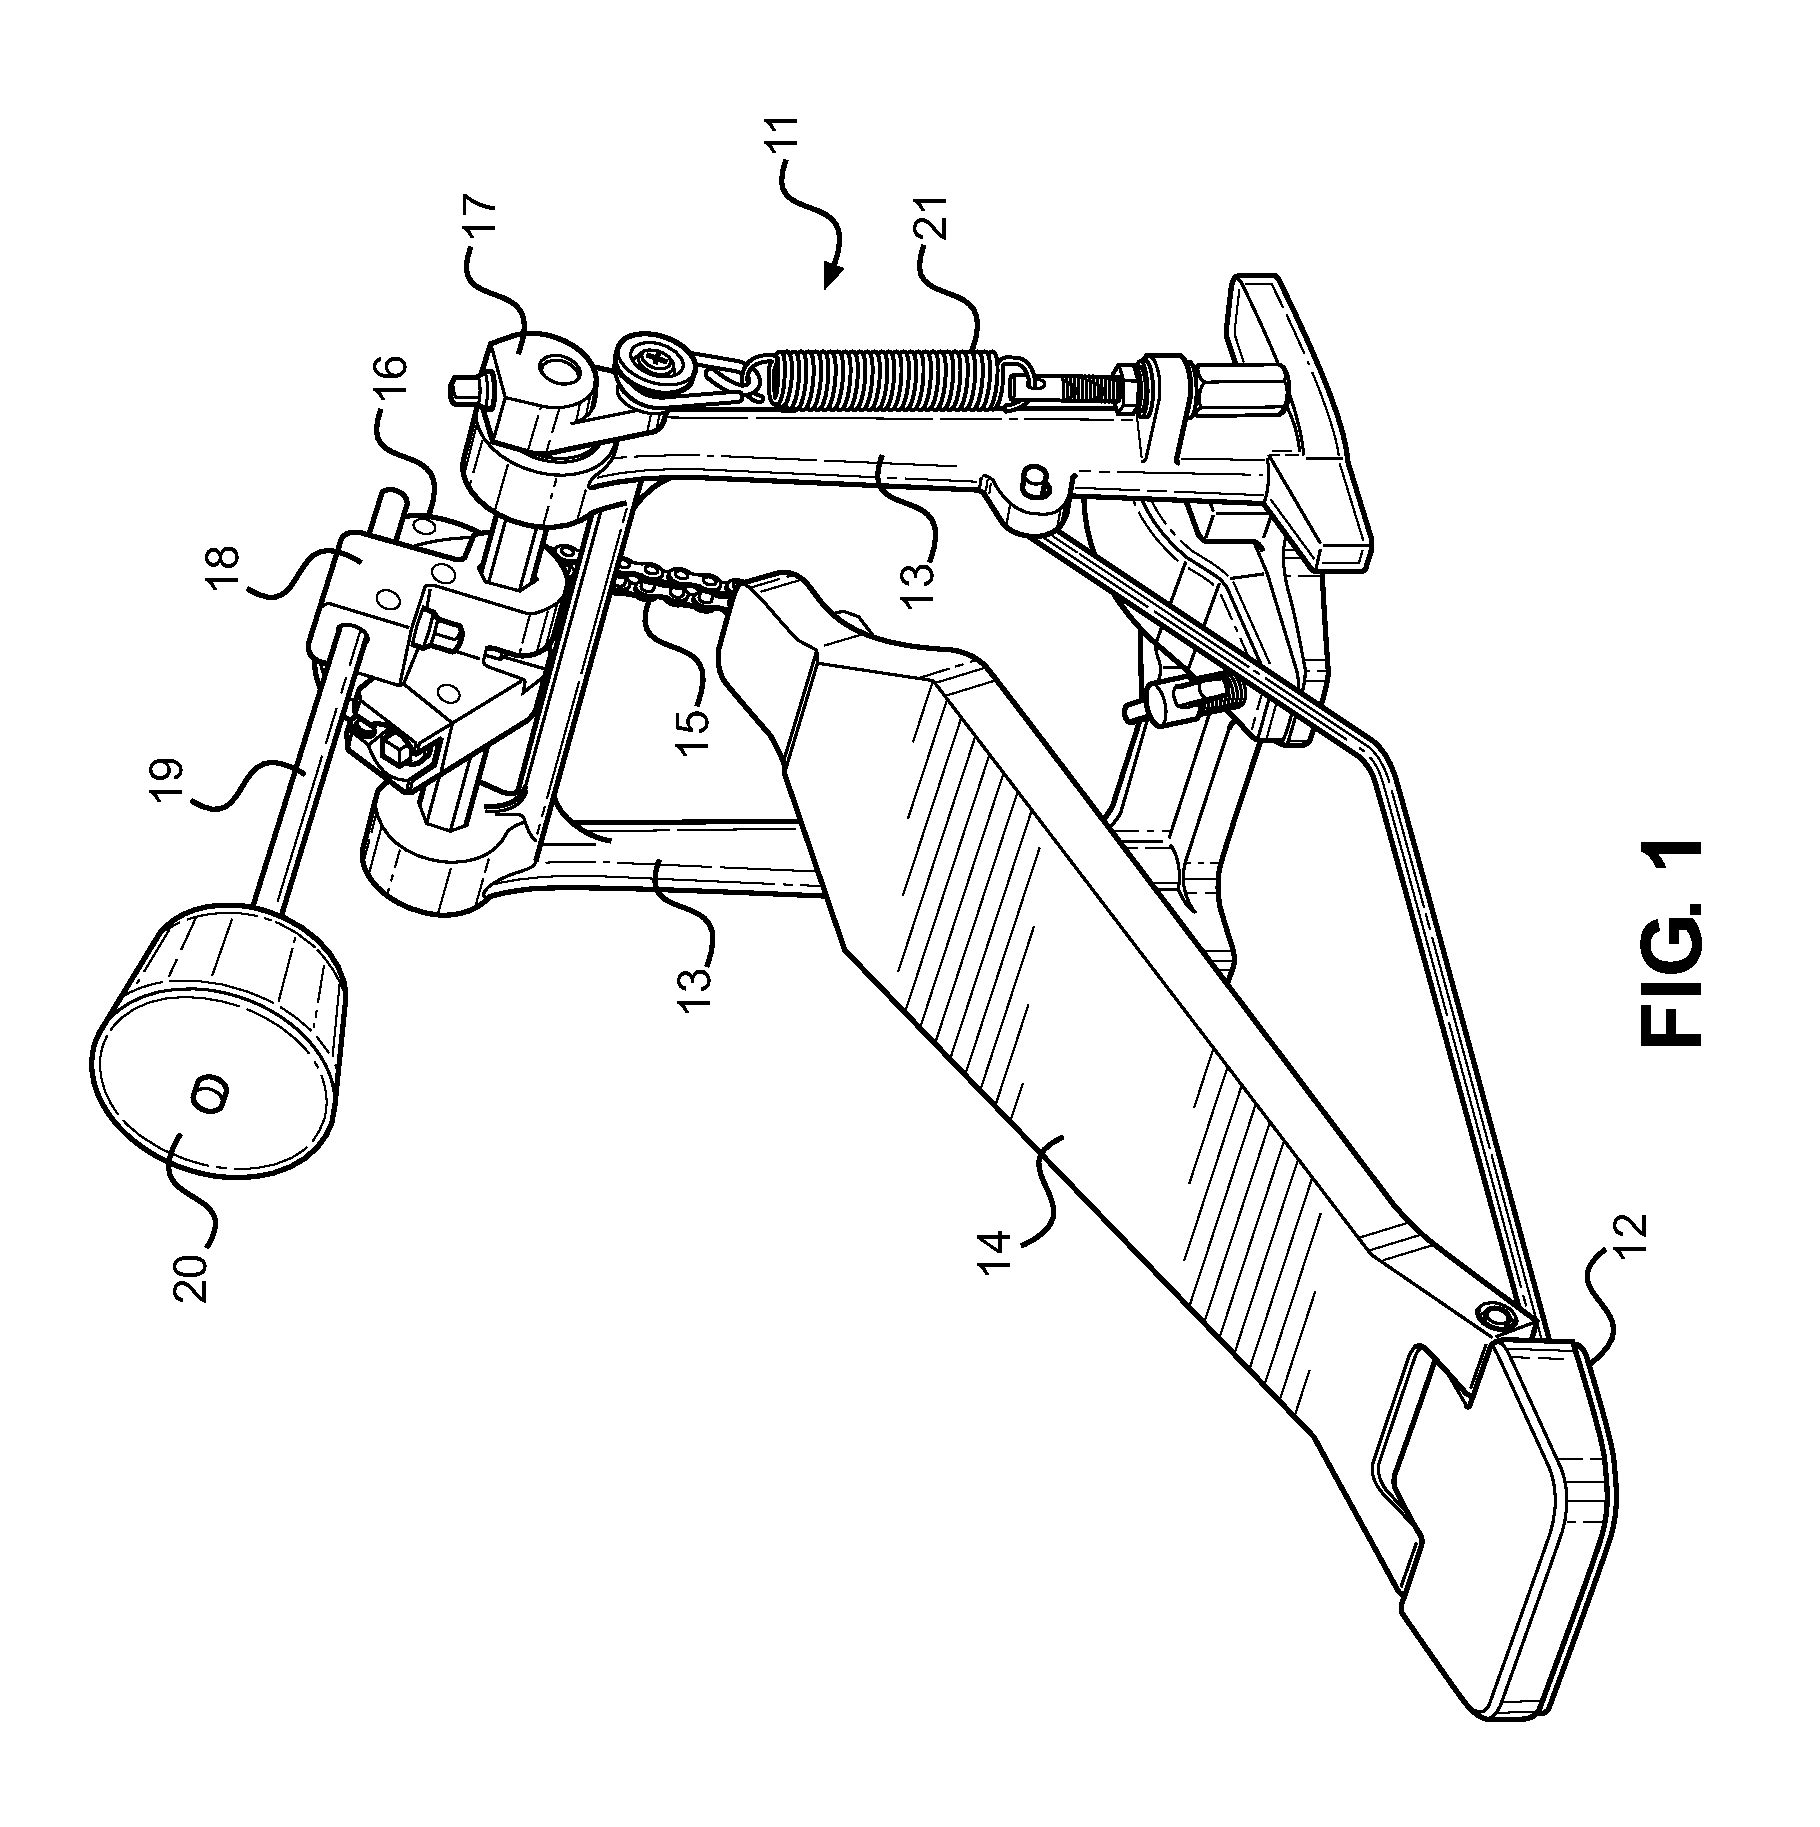 Device and Method for Tuning a Drum Pedal Assembly